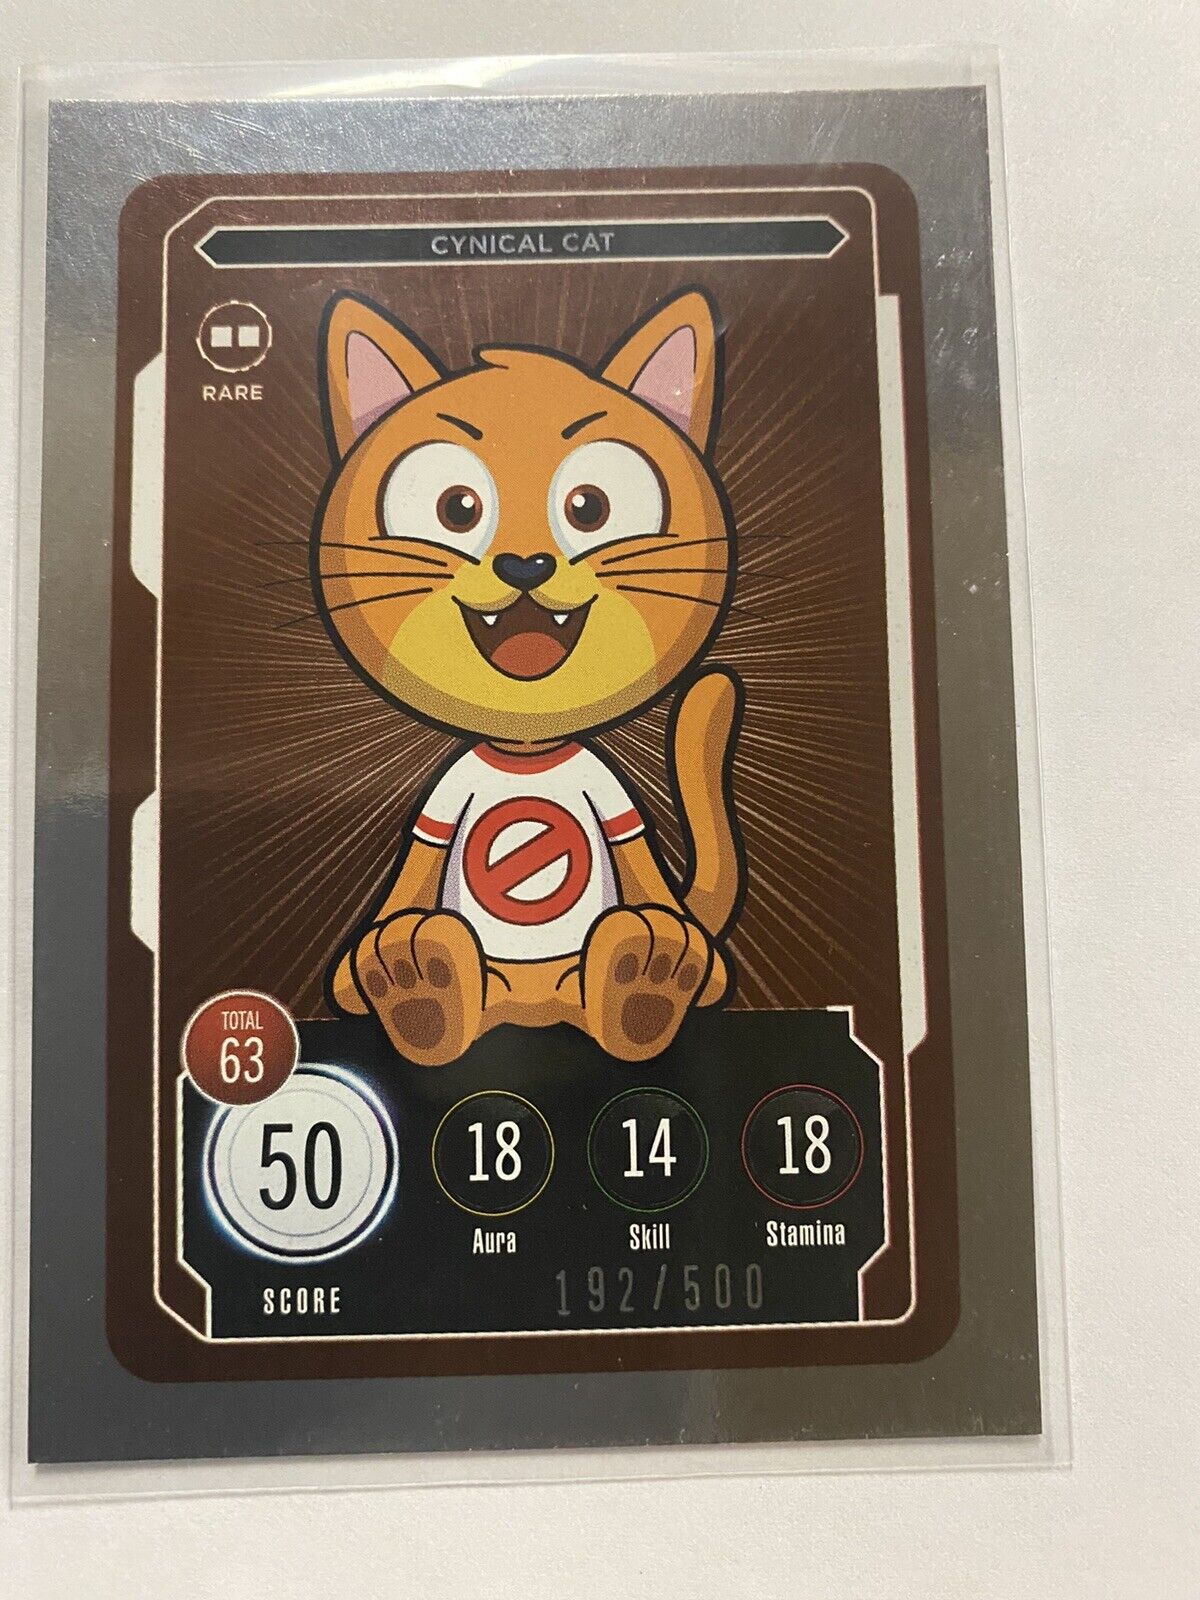 Cynical Cat RARE Veefriends Series 2 Compete and Collect Trading Card Game